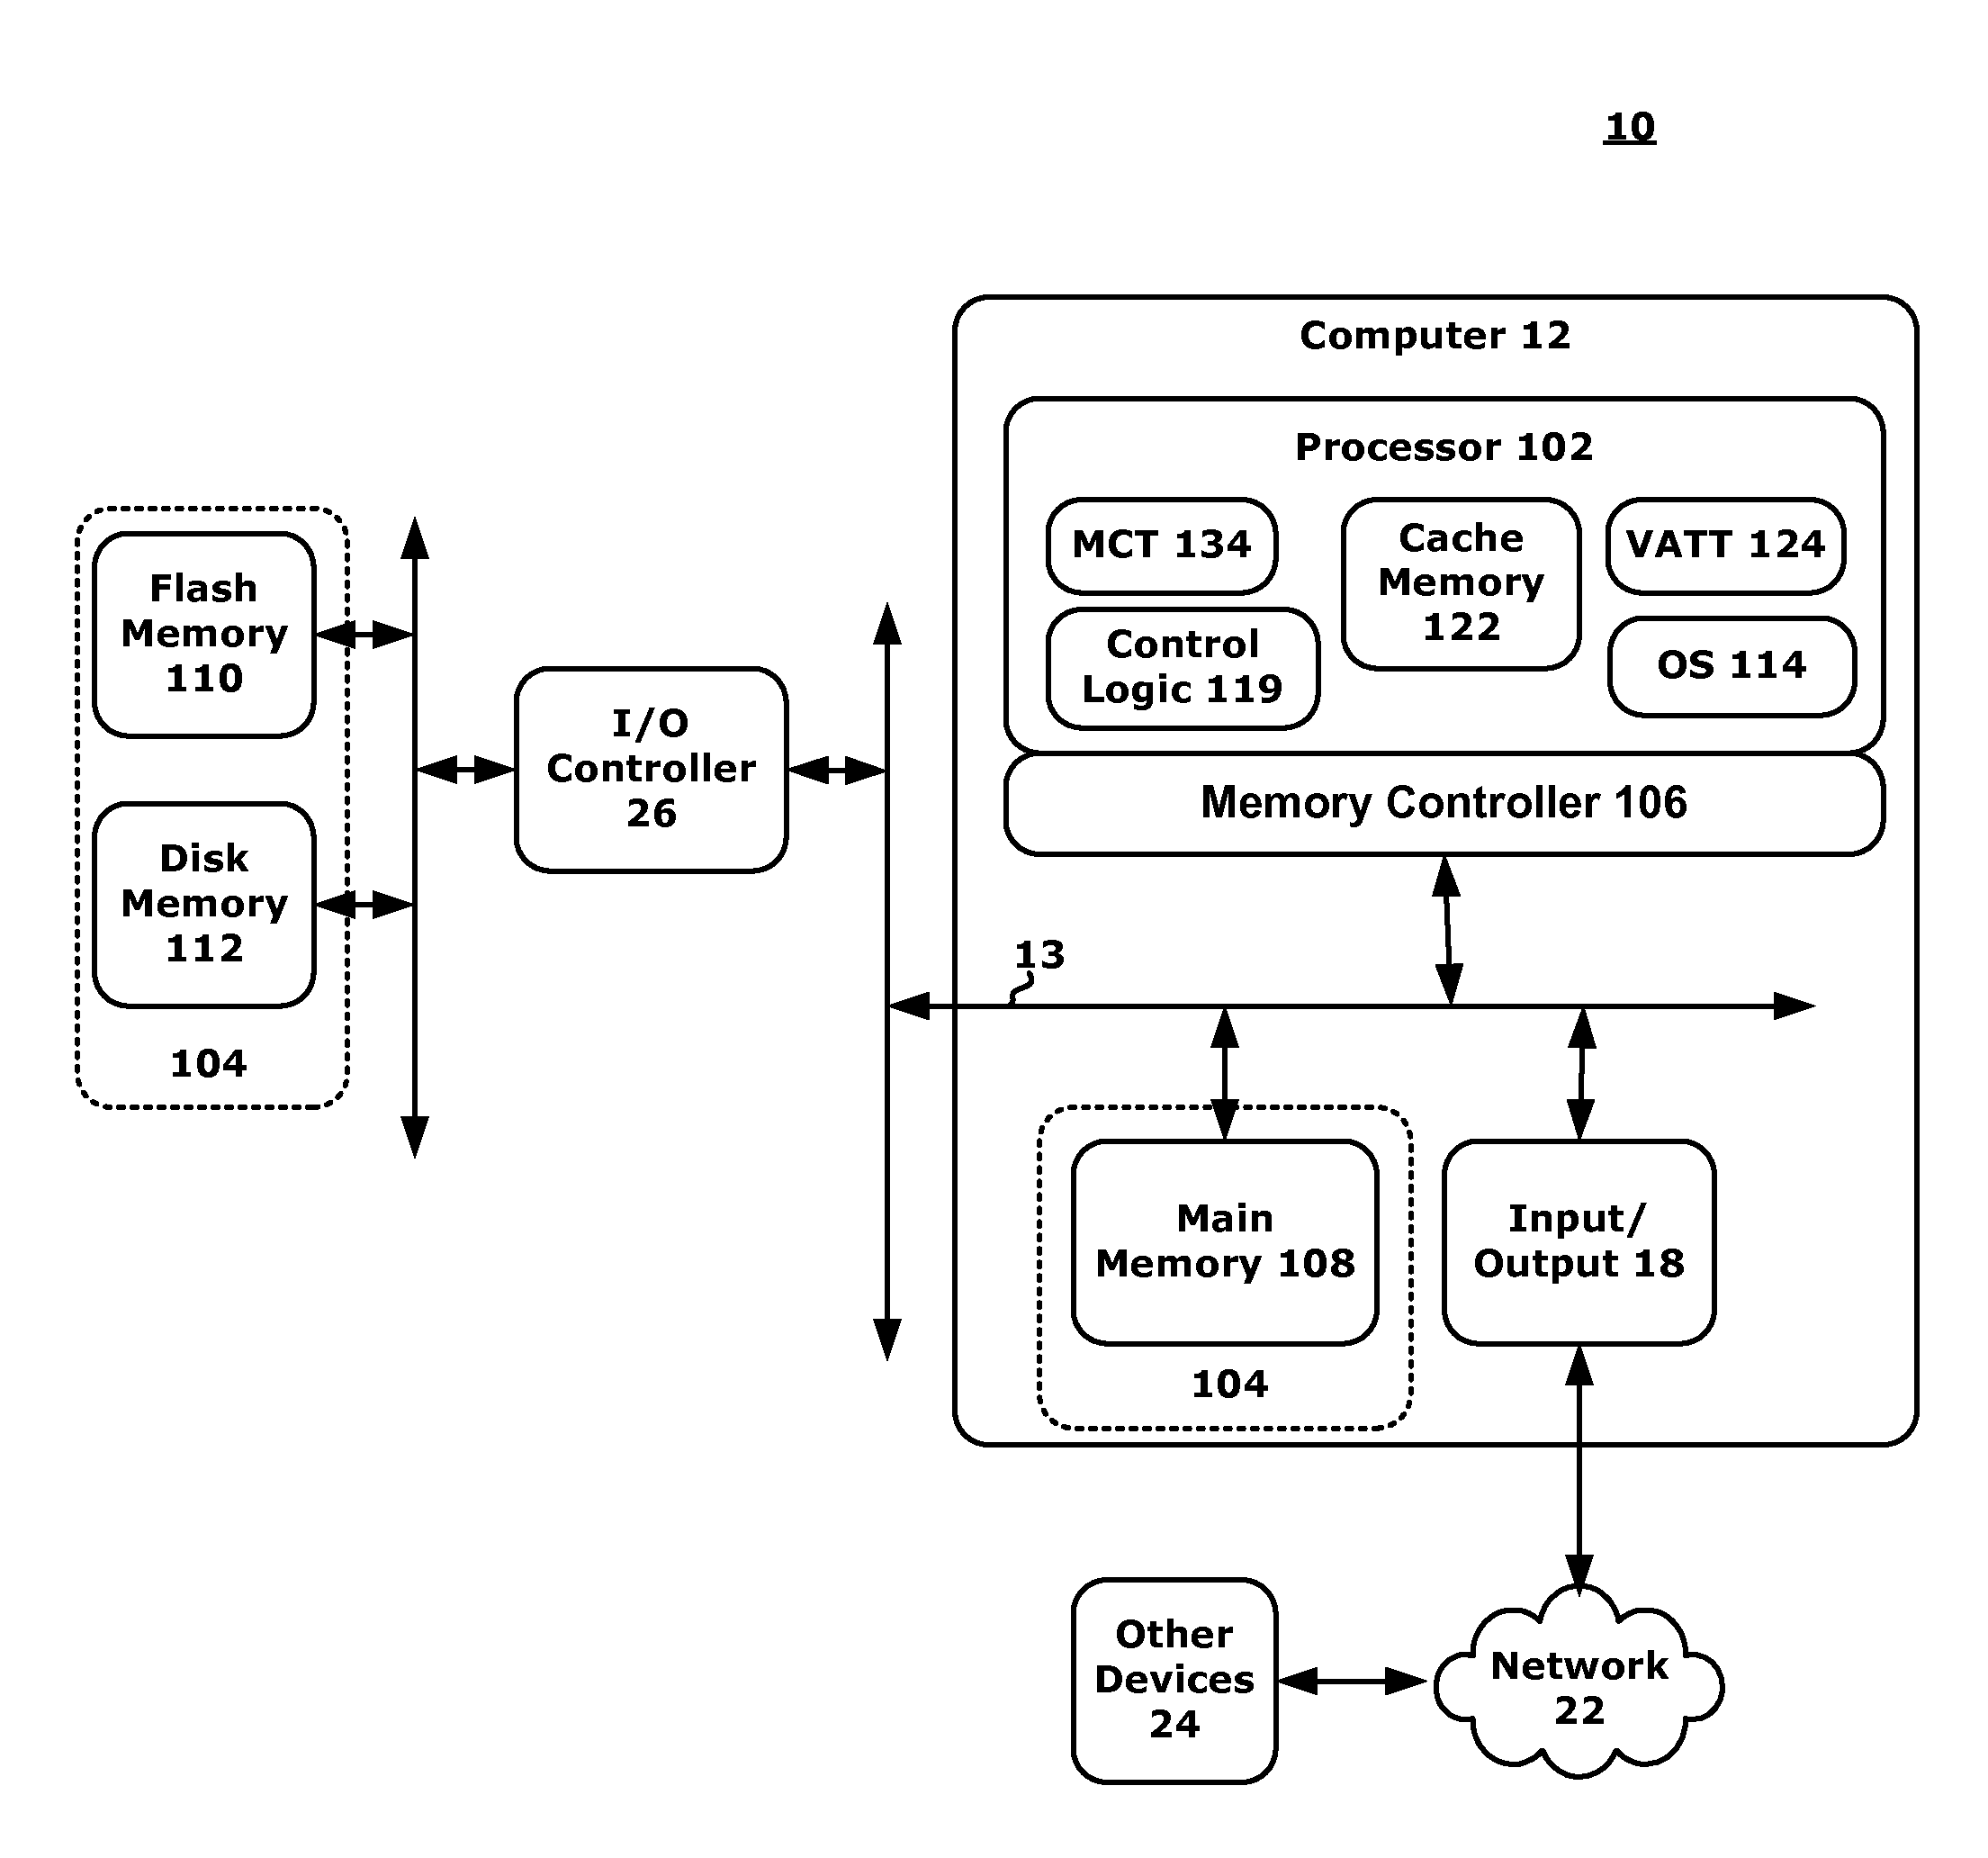 Memory Architecture with Policy Based Data Storage